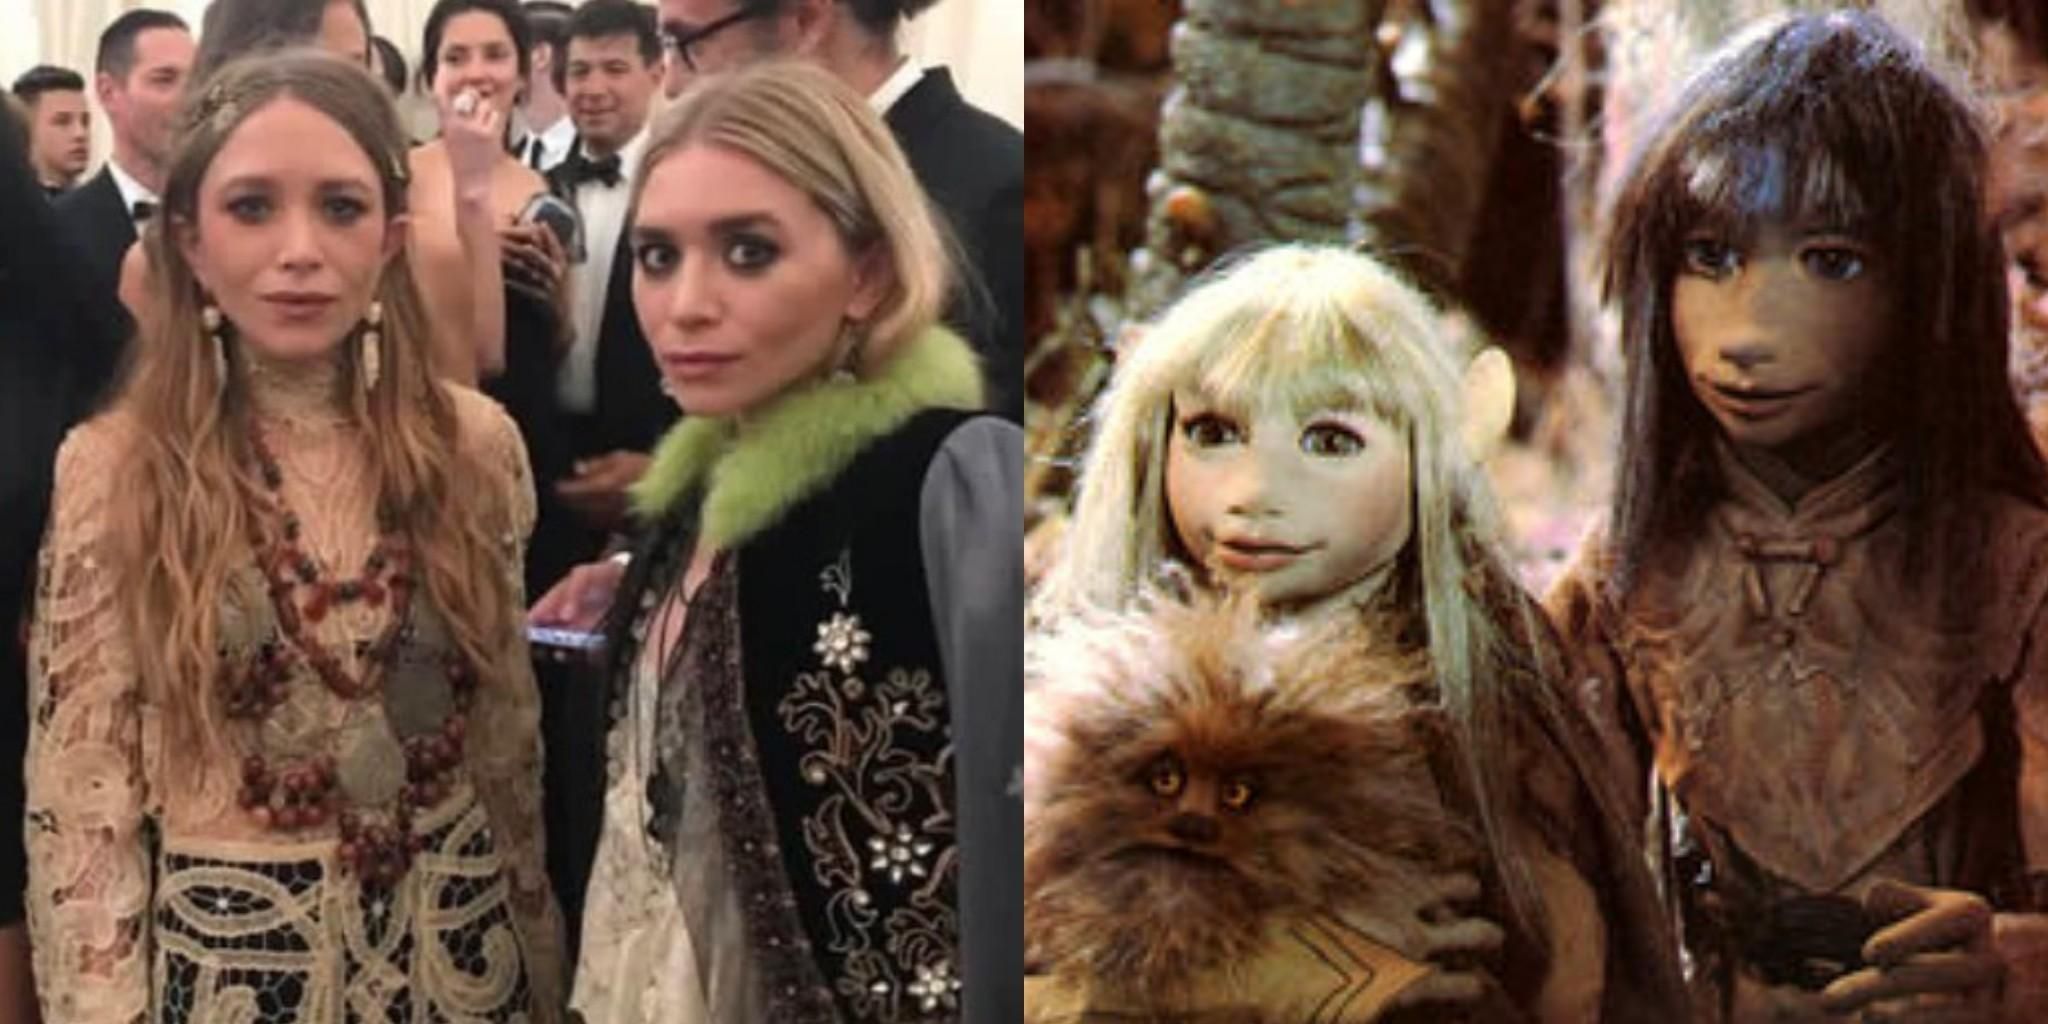 The Olsen twins attended the Met Gala last night, cosplaying as the last 2 gelfling from The Dark Crystal.